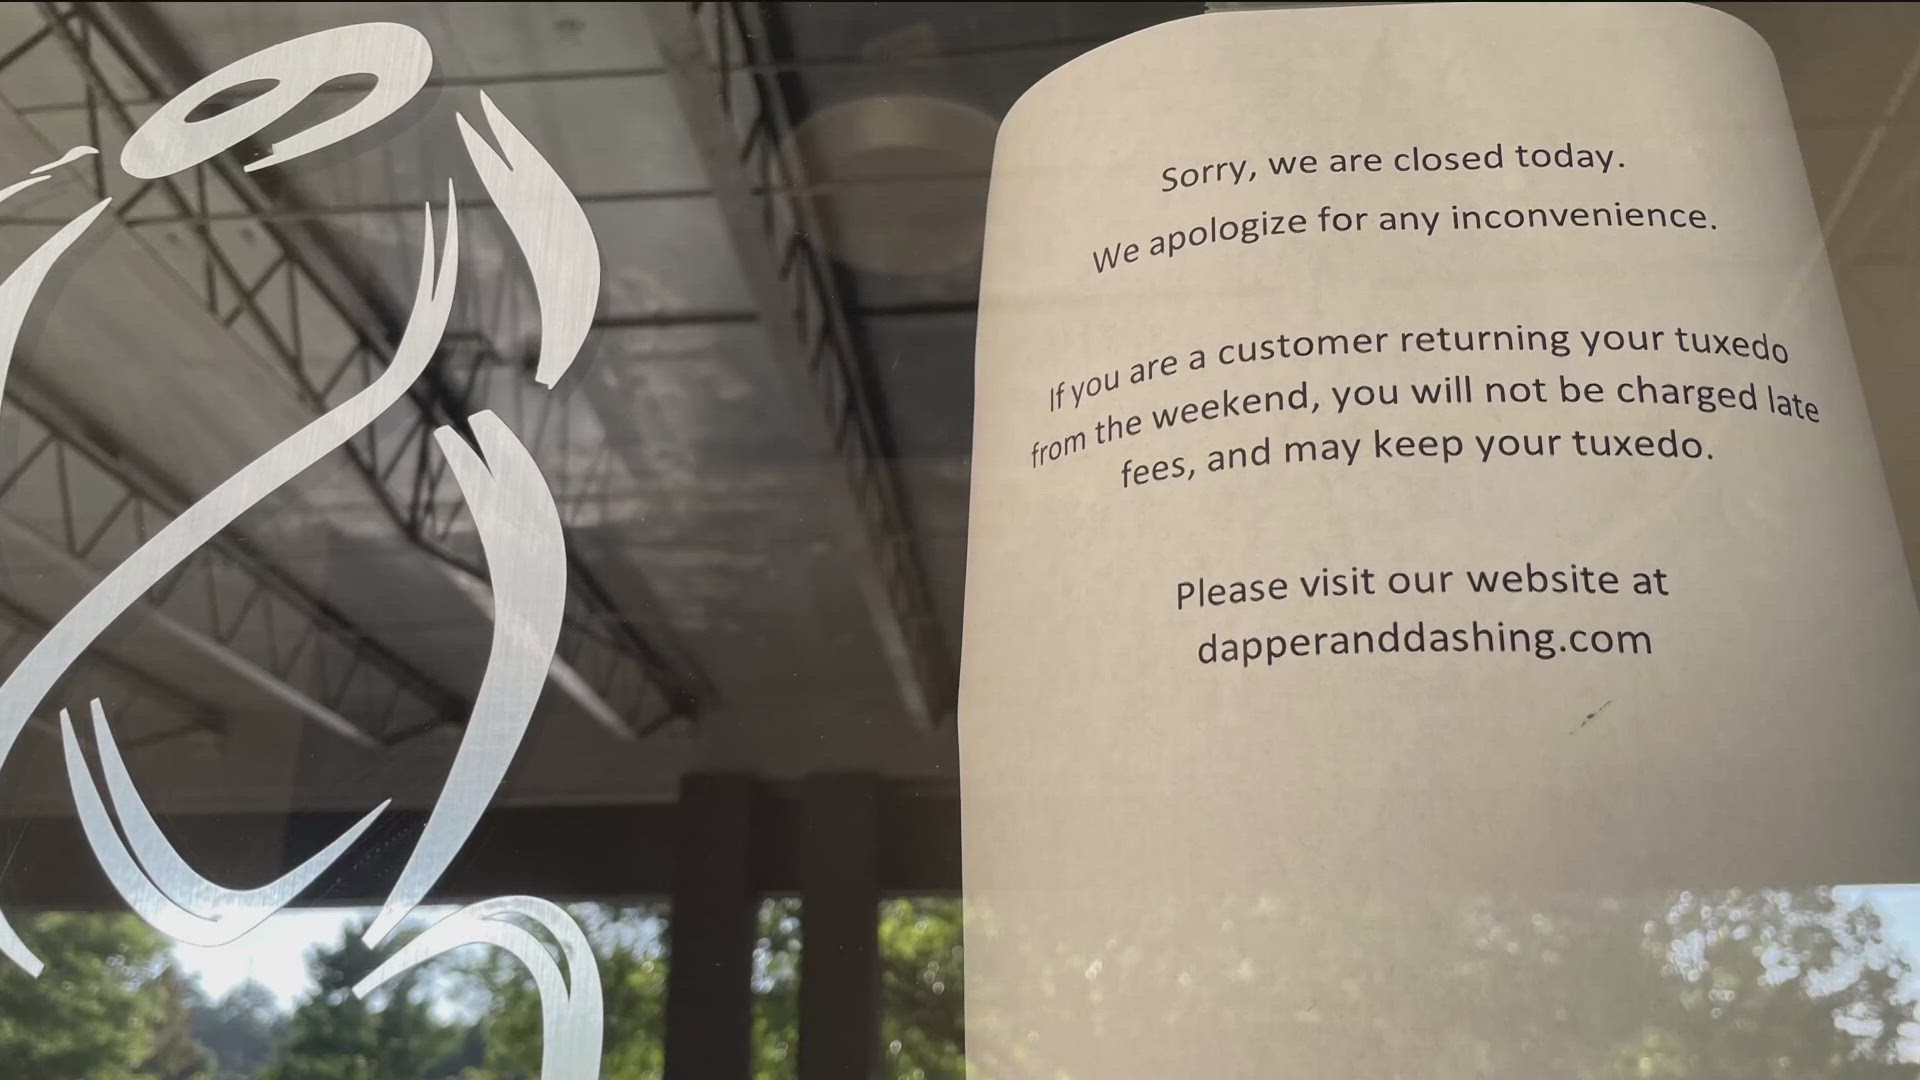 Several Dapper & Dashing branded locations in metro Atlanta posted notices on their doors indicating the closure, telling customers to keep their rentals